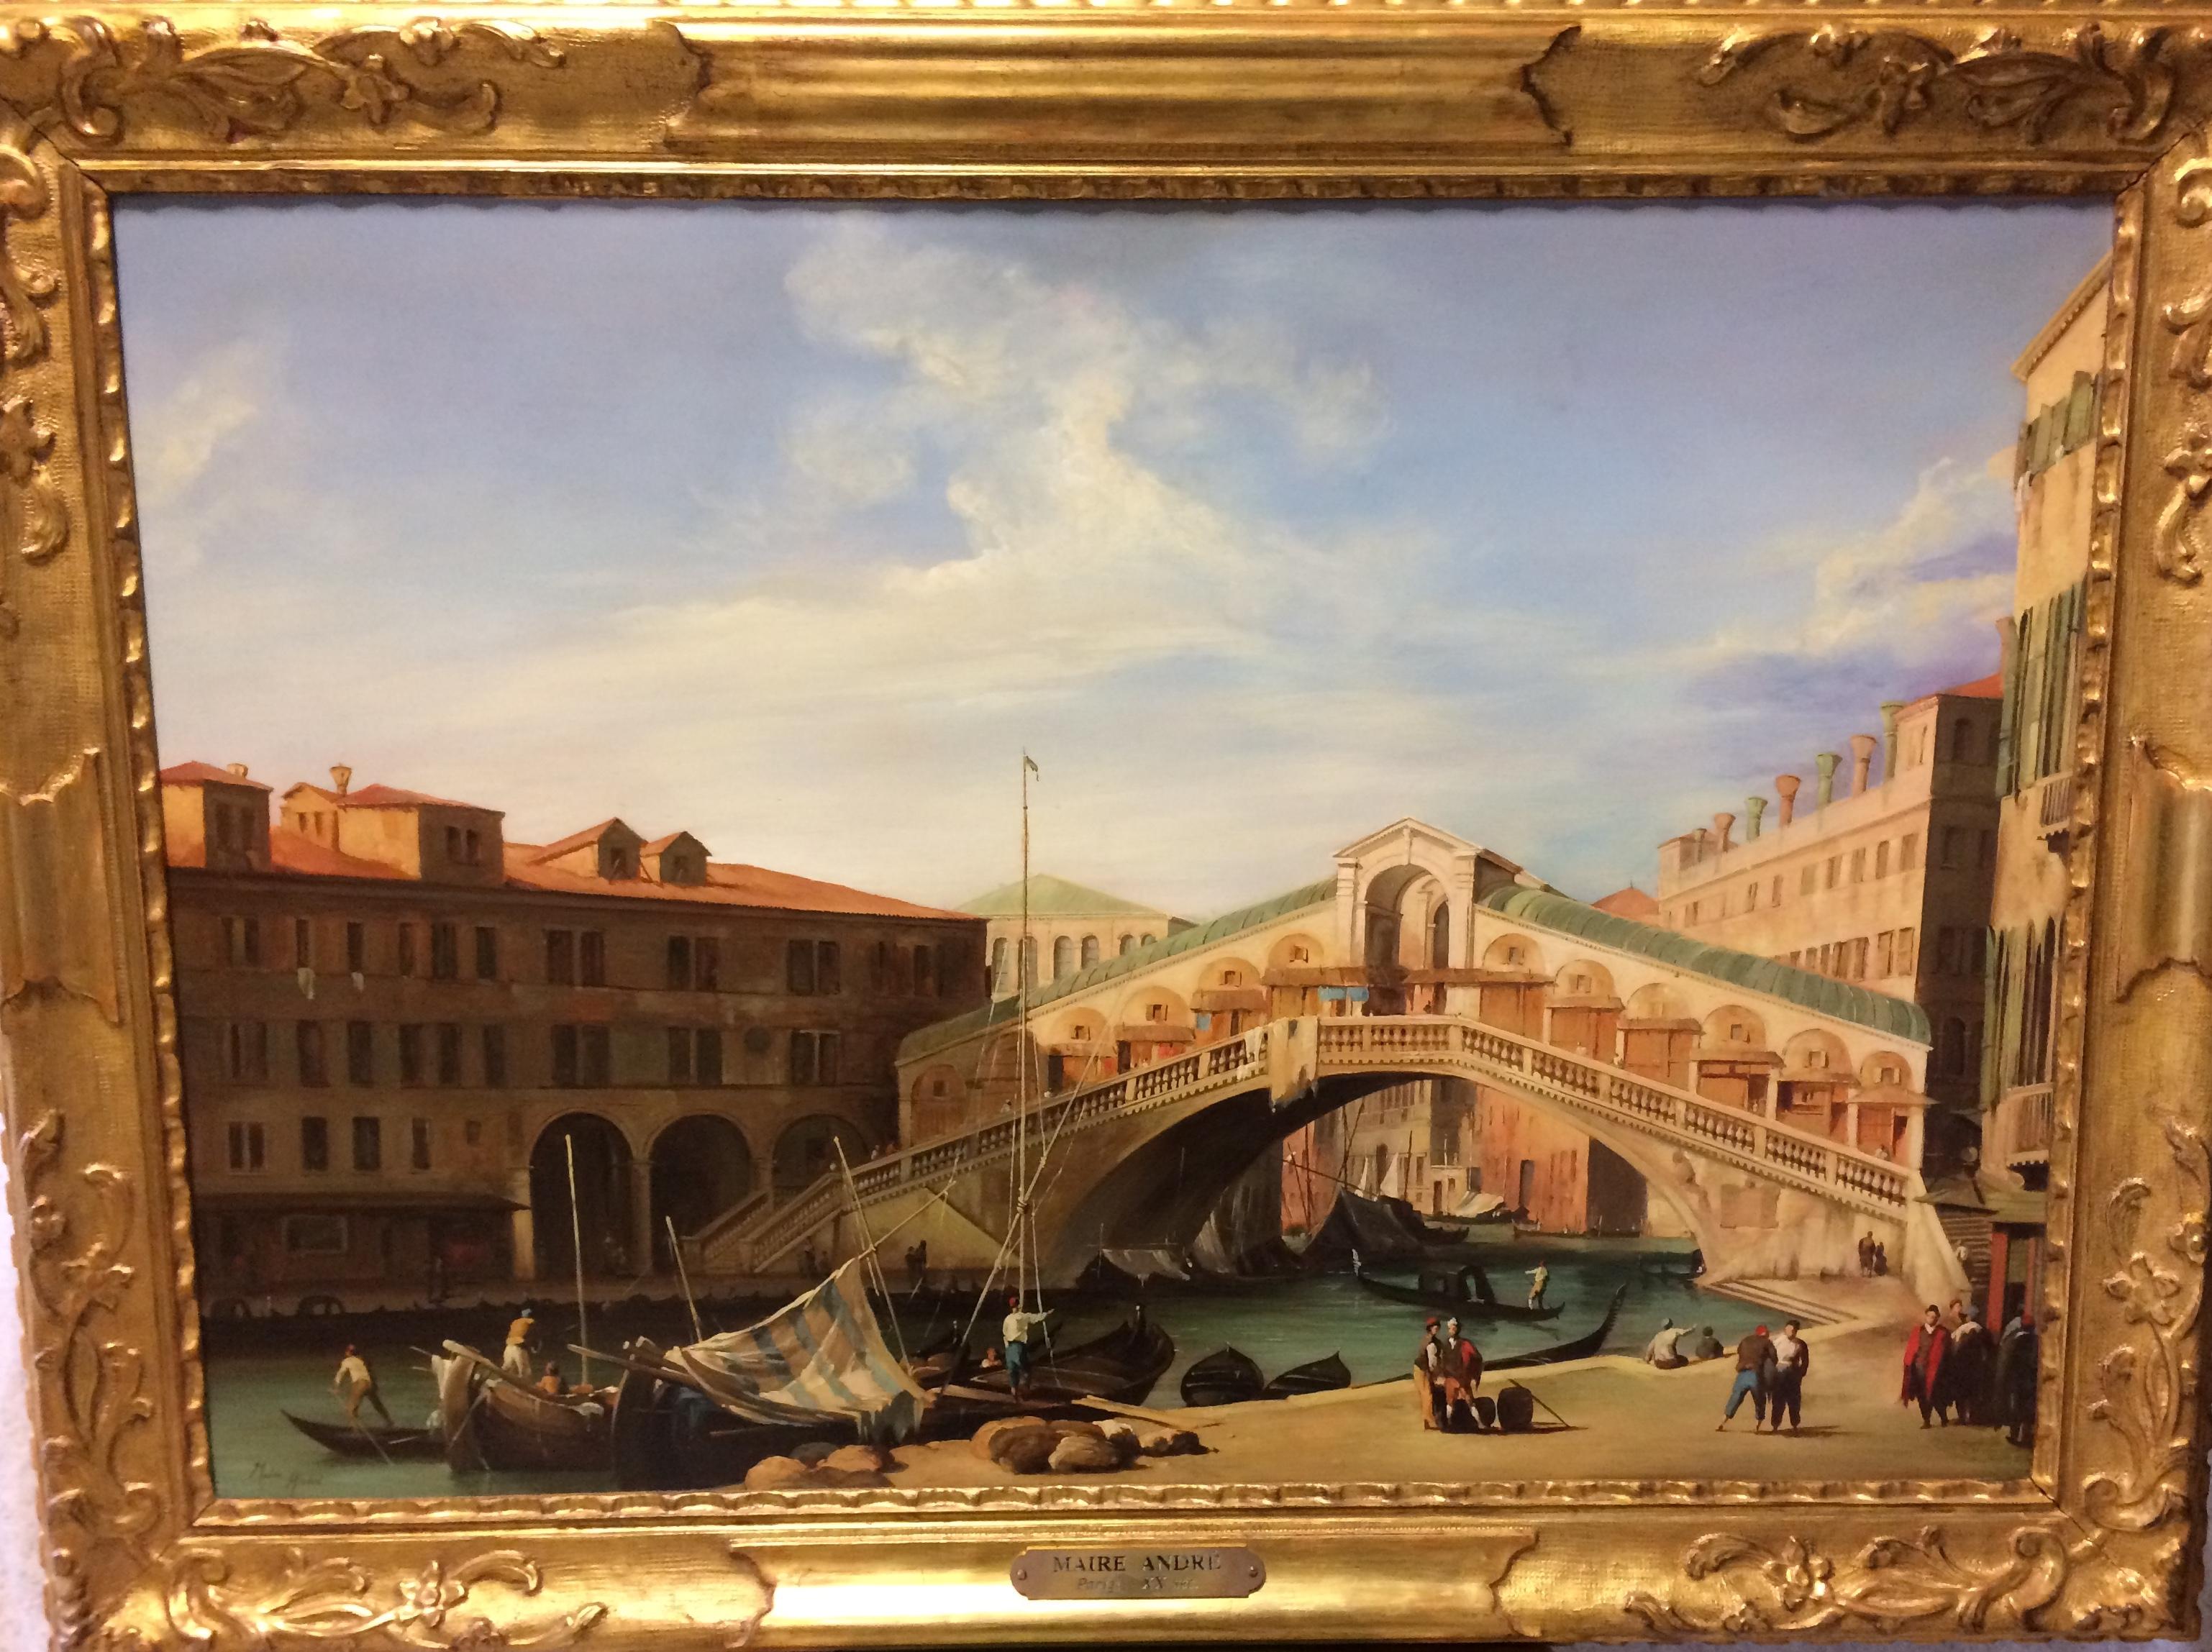 Pair of Paintings with Venetian Landscape 1940 - Brown Landscape Painting by Maire Andre